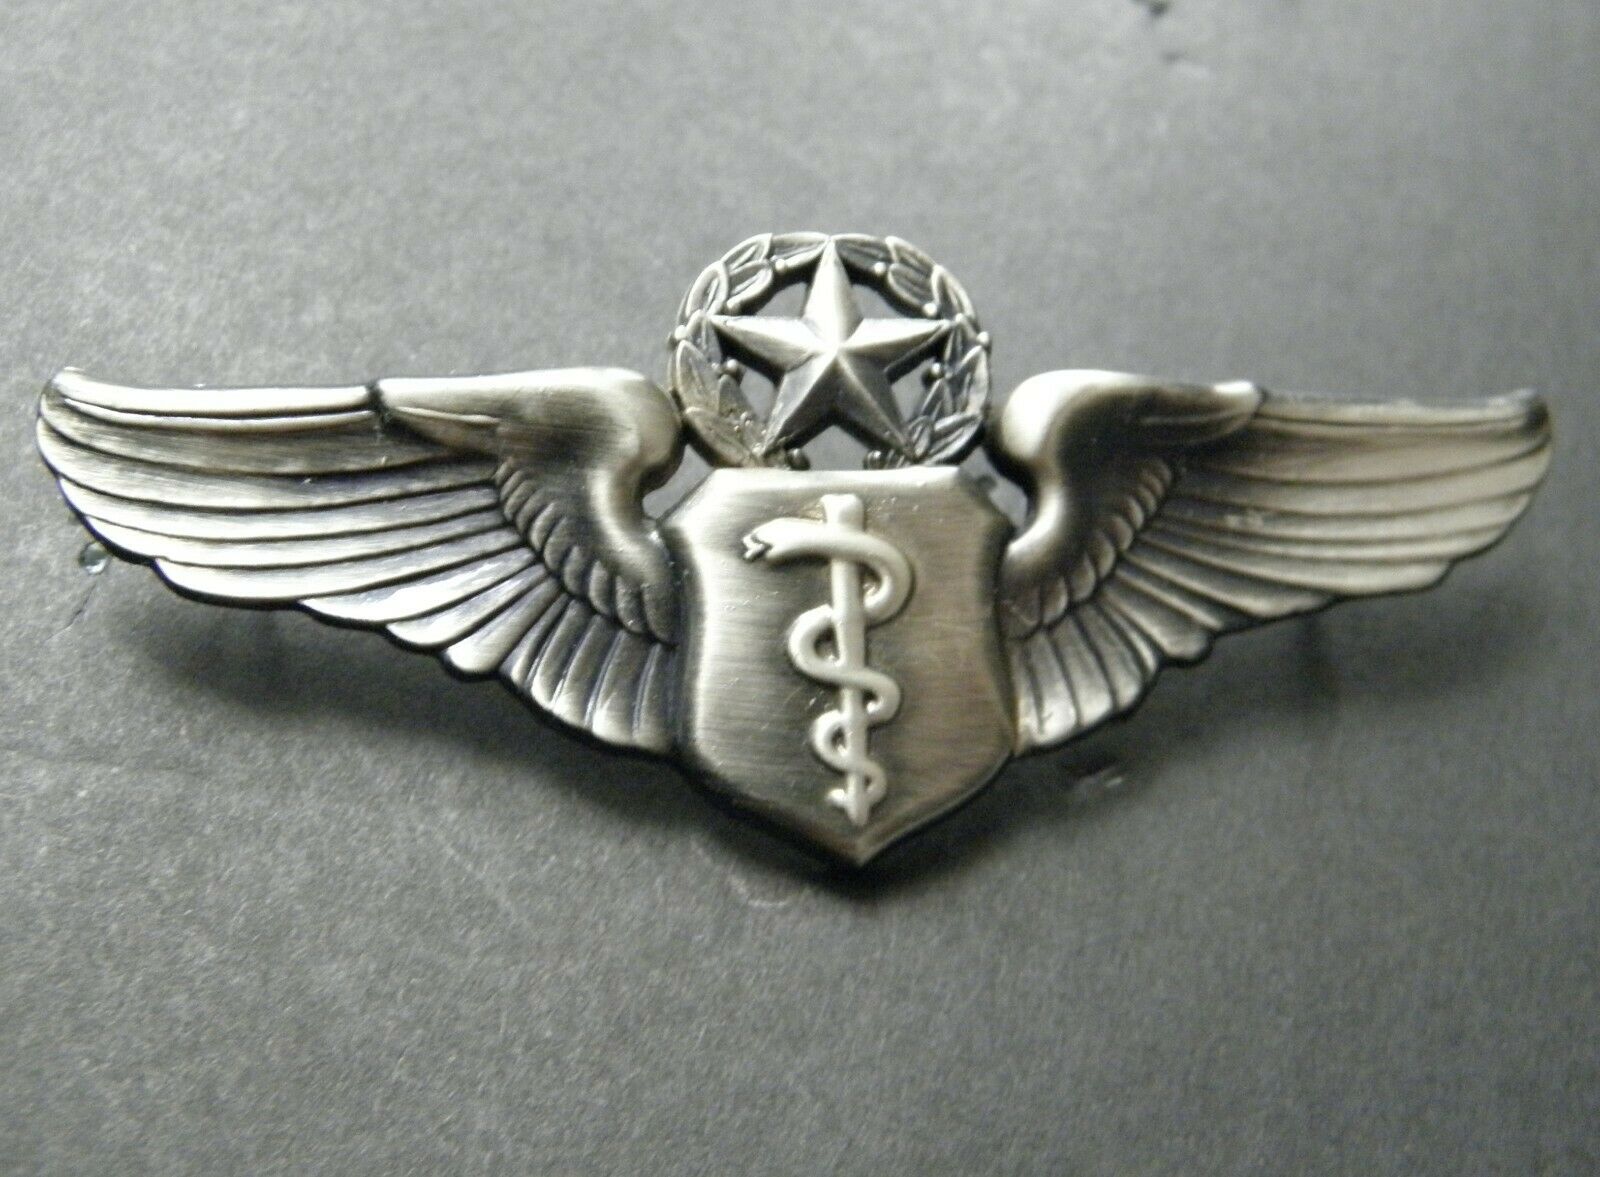 USAF AIR FORCE LARGE MASTER FLIGHT SURGEON WINGS LAPEL PIN BADGE 3 INCHES 